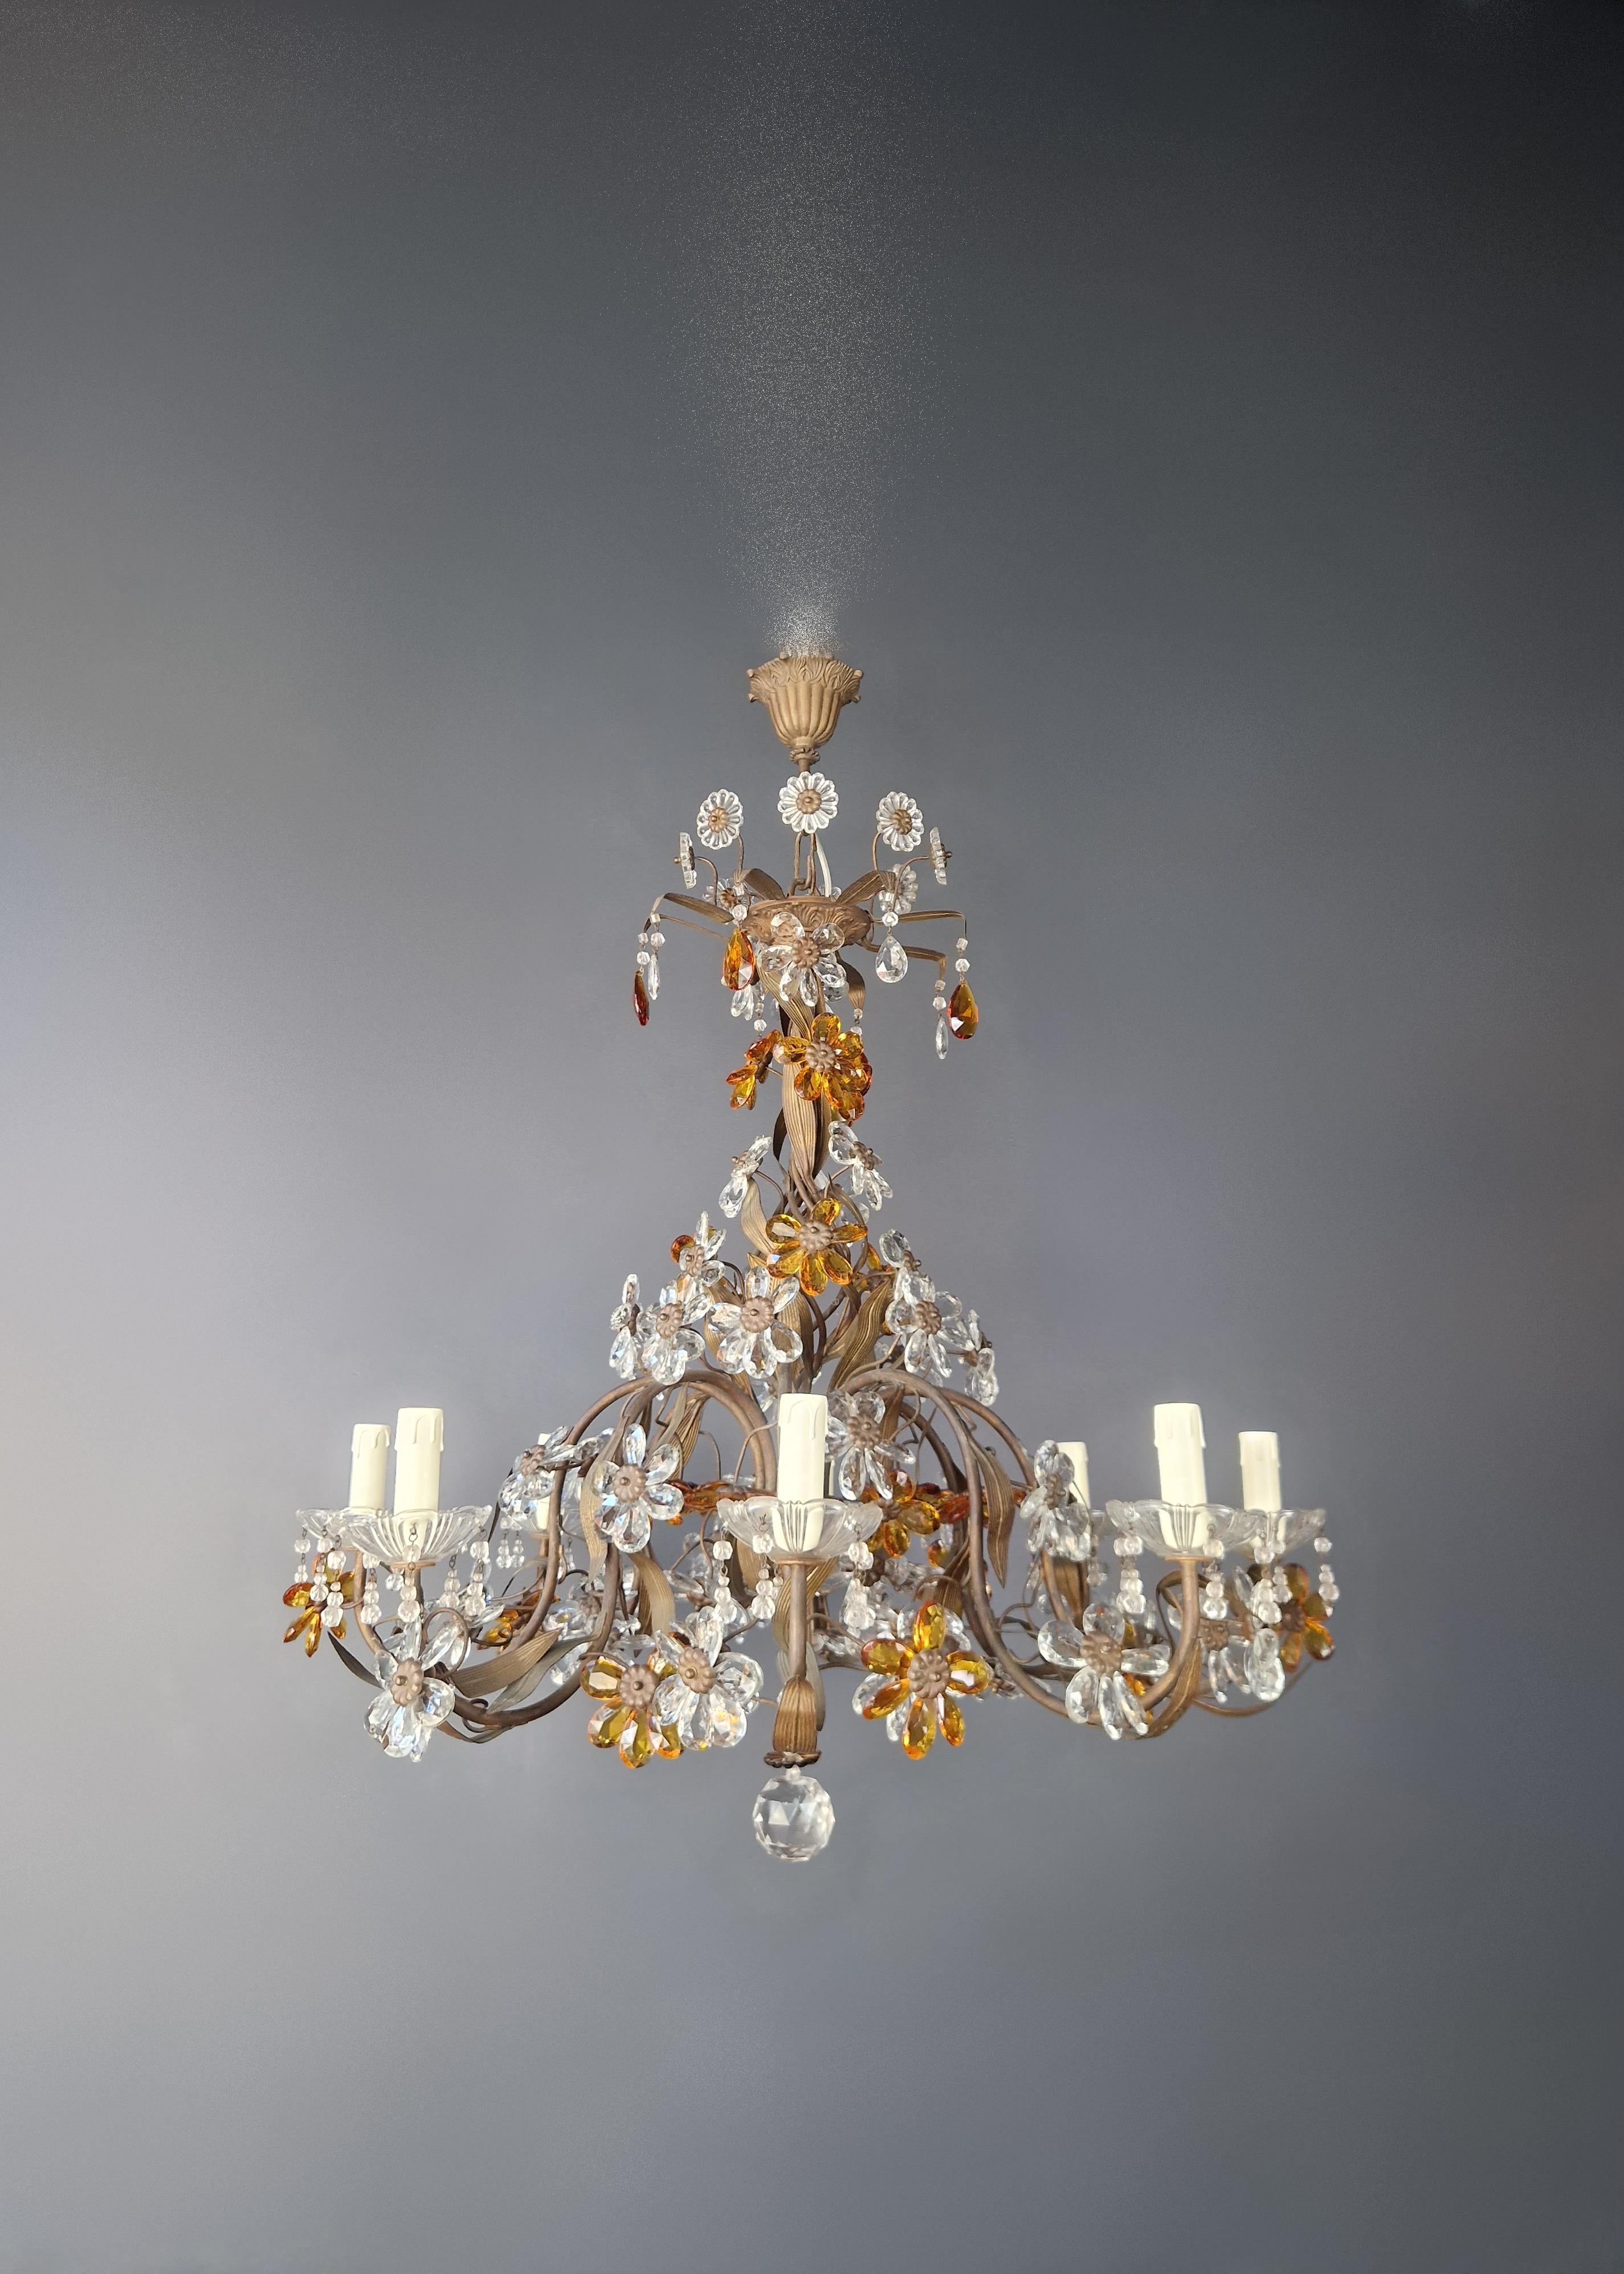 Elegant Vintage Chandelier: A Fusion of History and Elegance

Step into a realm of timeless beauty with our meticulously restored old chandelier, a testament to the skilled craftsmanship of a bygone era. Lovingly brought back to life in Berlin, this